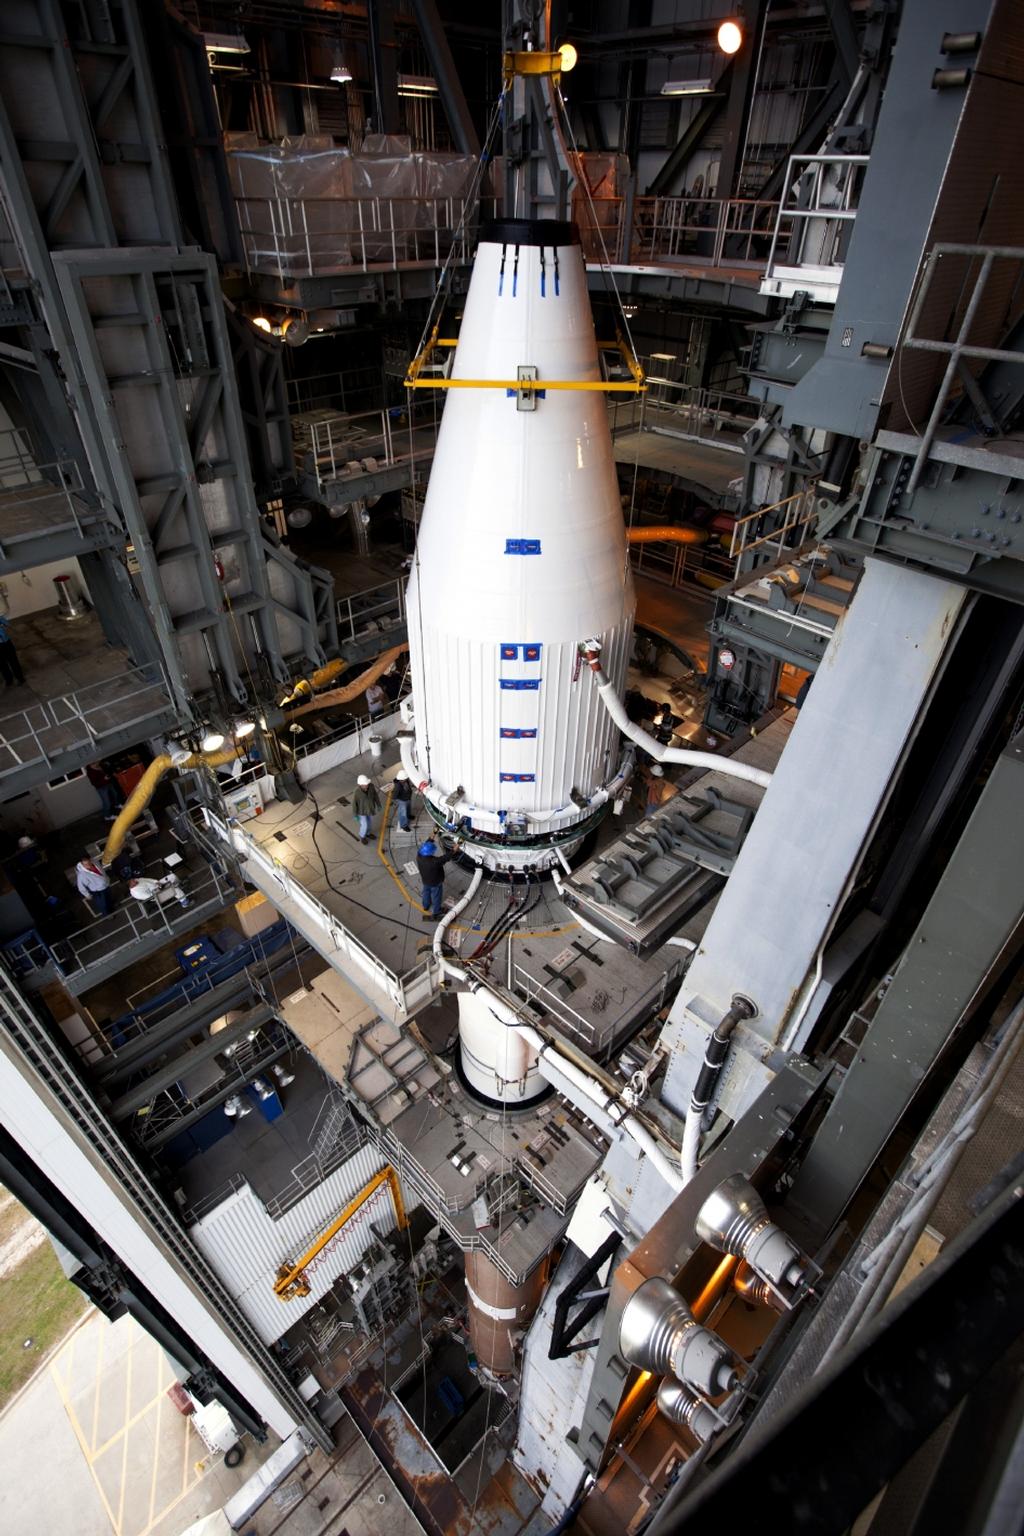 Crews guide NASA's Mars Atmosphere and Volatile EvolutioN, or MAVEN, spacecraft, inside a payload fairing, into place atop a United Launch Alliance Atlas V rocket at the Vertical Integration Facility at Space Launch Complex 41.